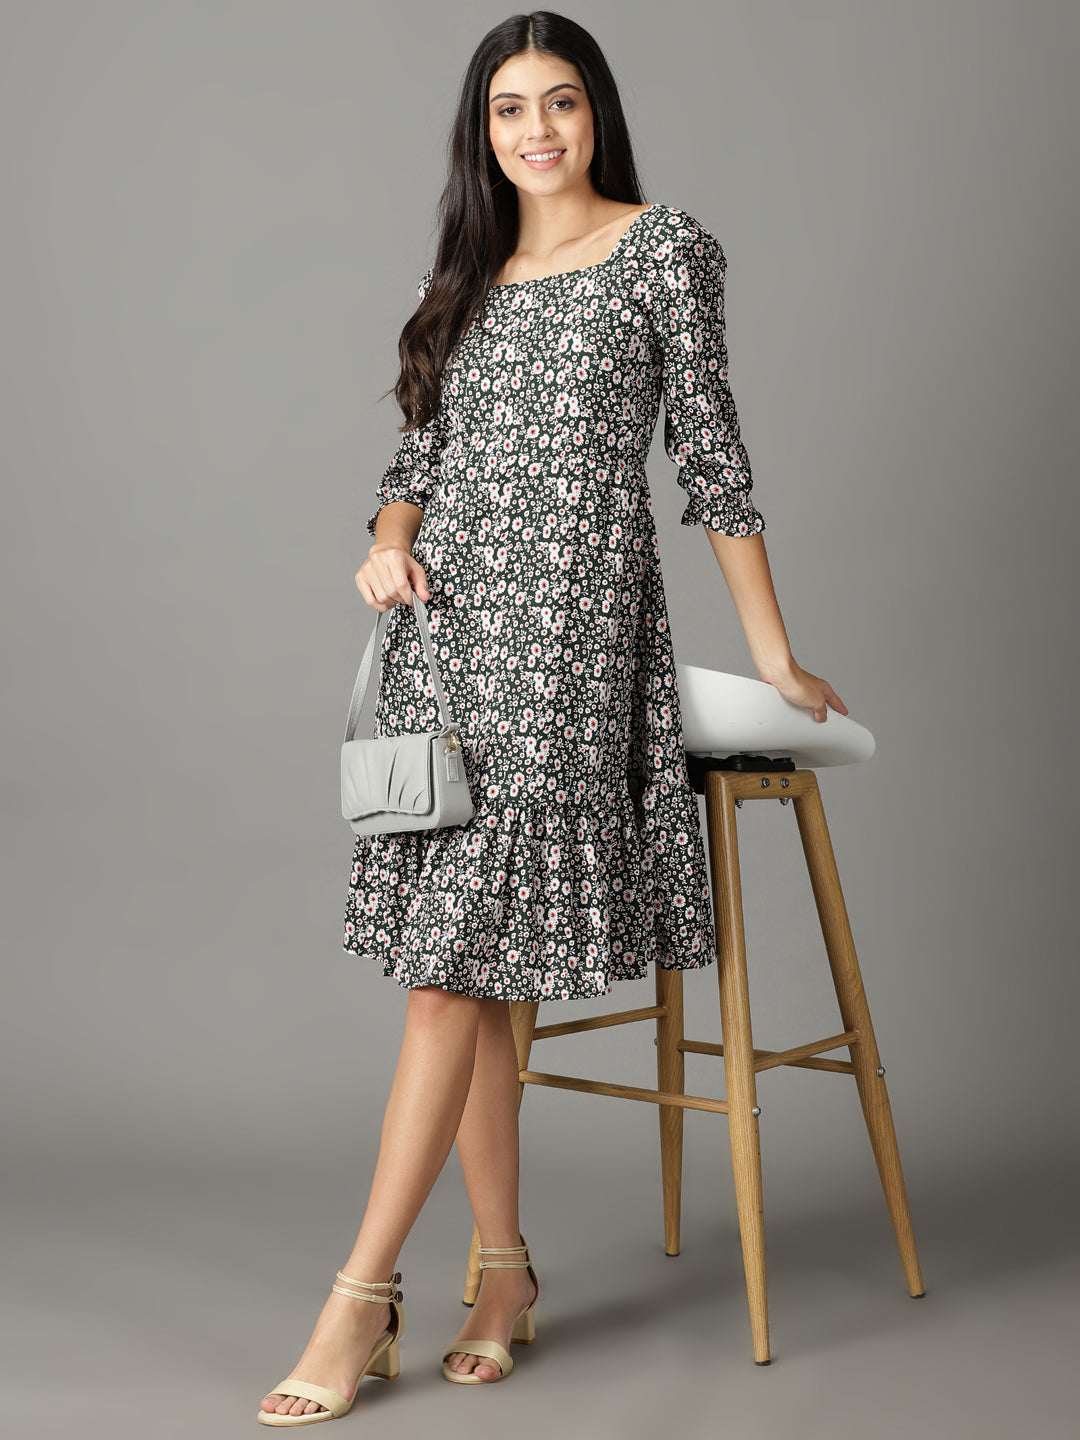 Women's Olive Printed Fit and Flare Dress